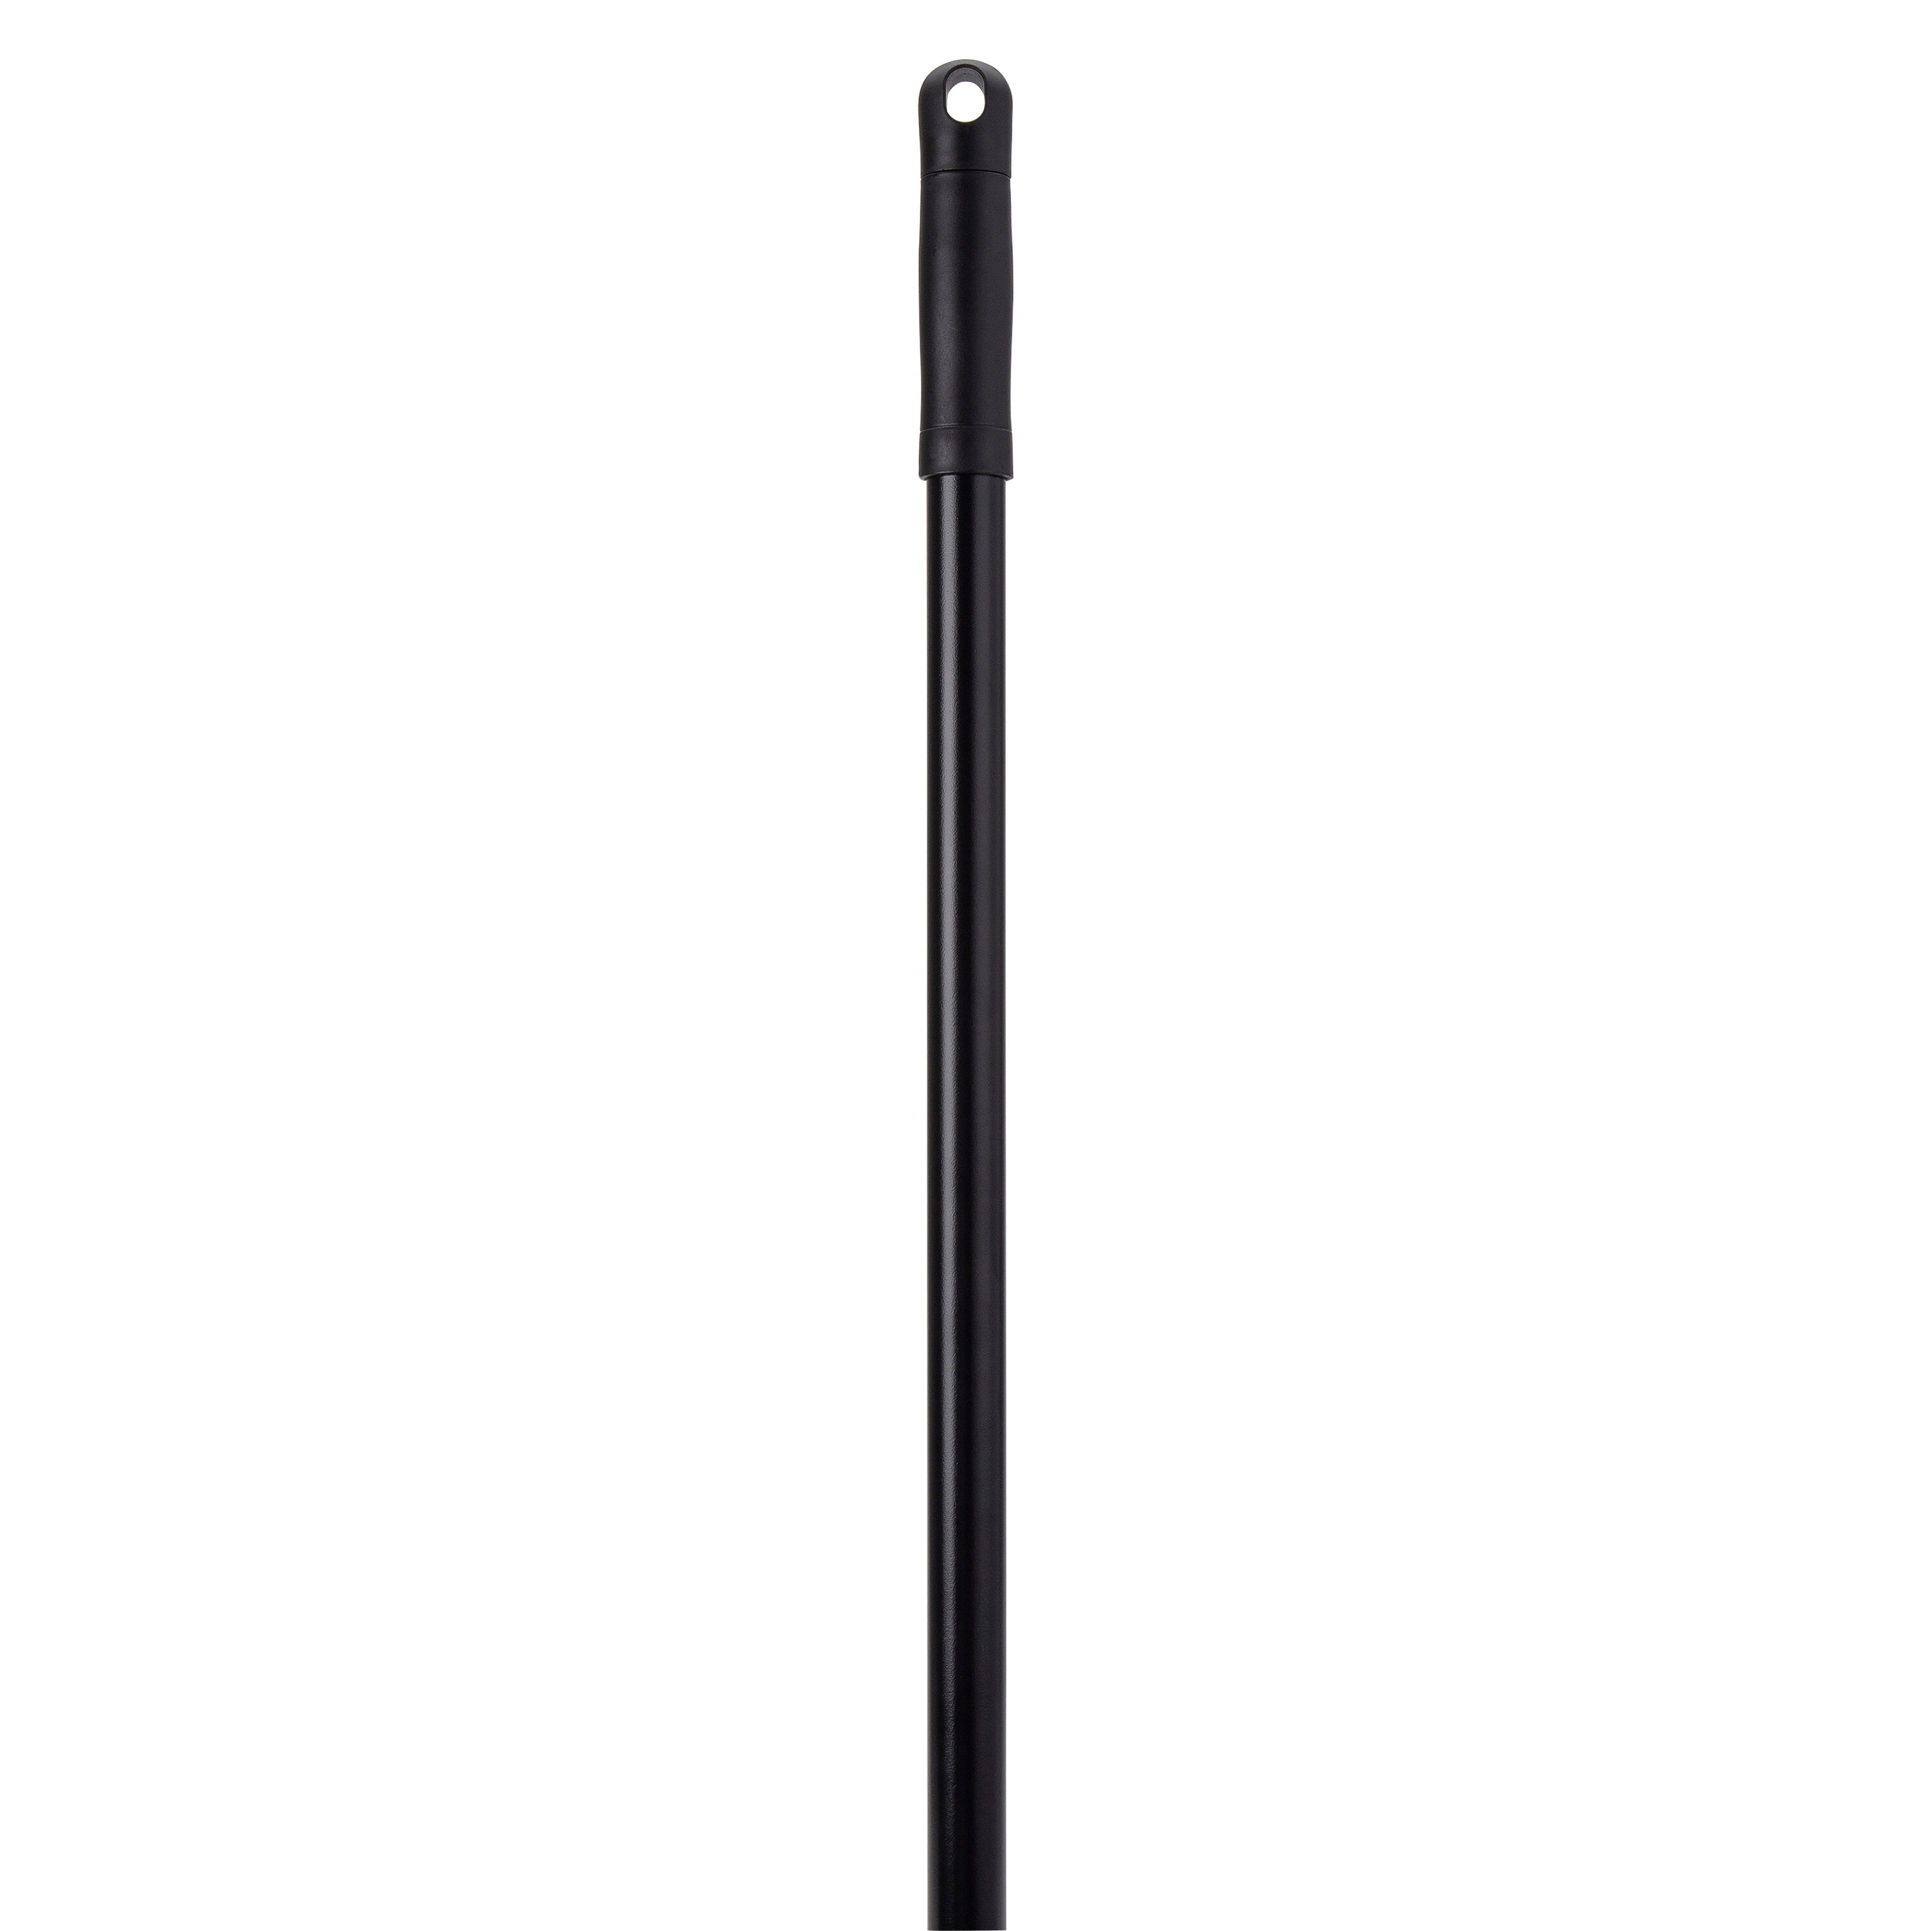 HDX 18 in. Interchangeable Push Broom with Squeegee (2-Count), Black